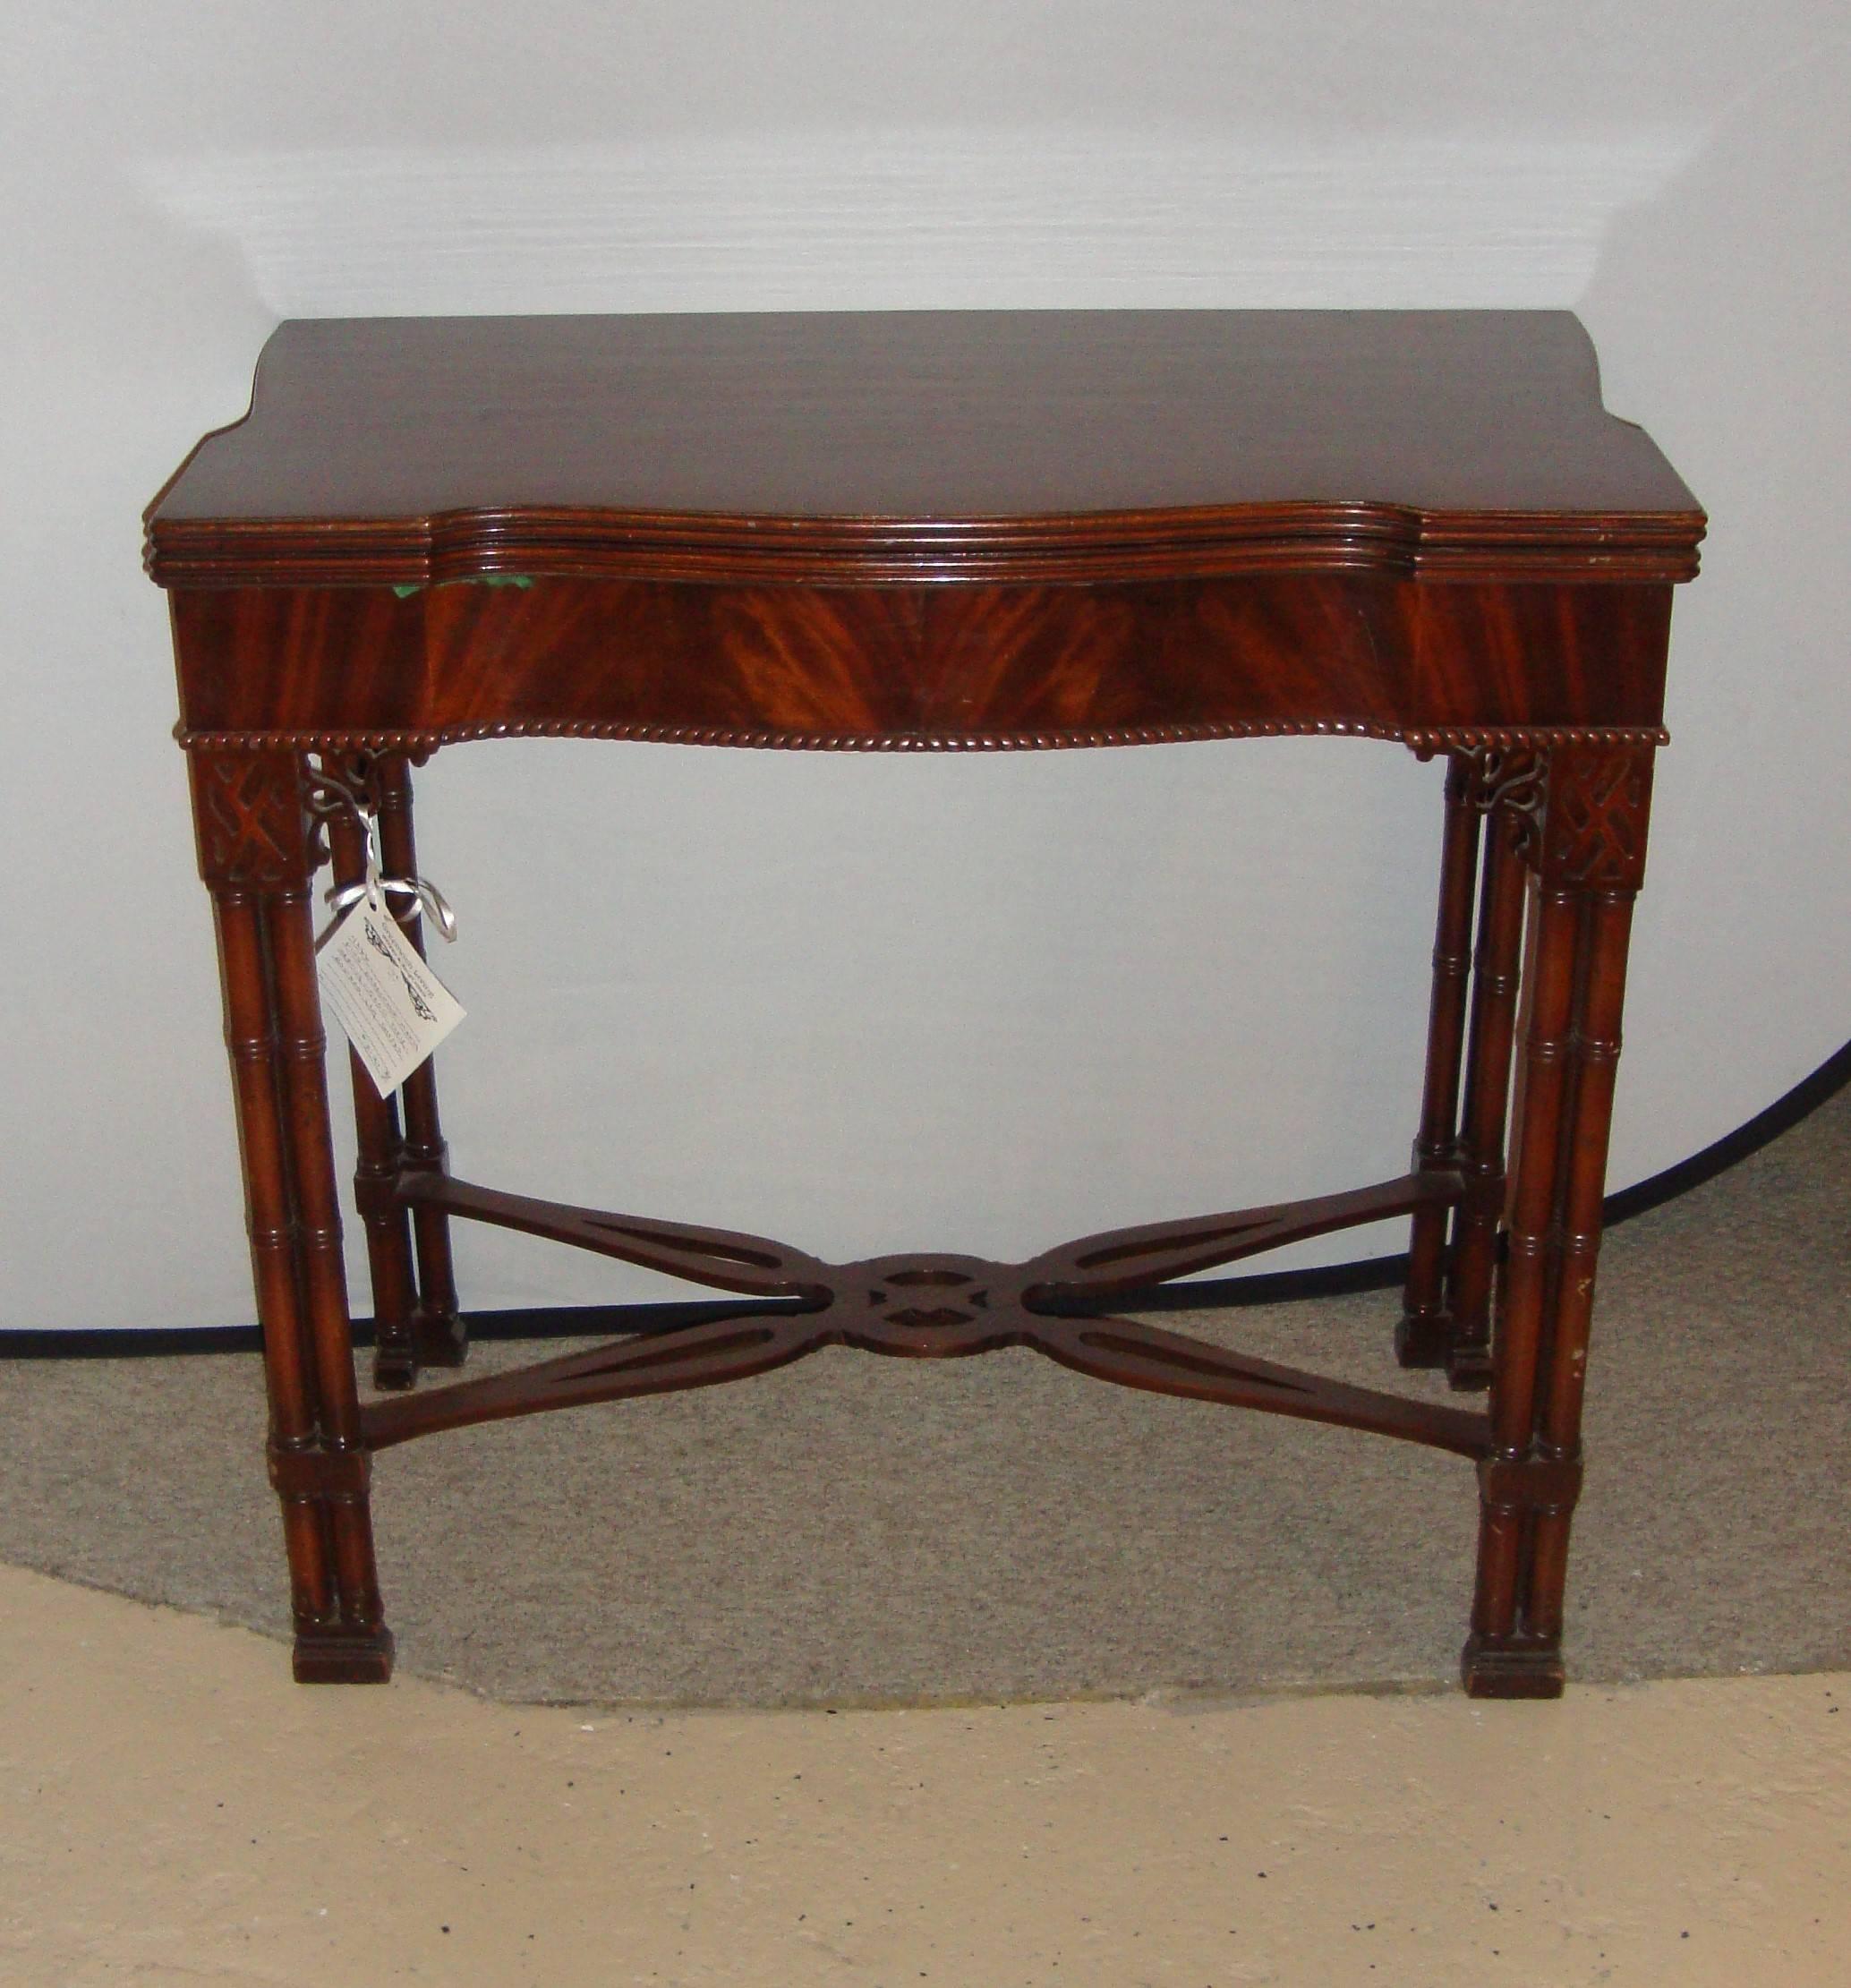 A fine Chippendale mahogany serving-card table, sitting on bamboo shaped legs. A flip-top crotch or flame mahogany card or serving table, circa 1940s. The straight form legs being supported by a carved under carriage make this table structurally